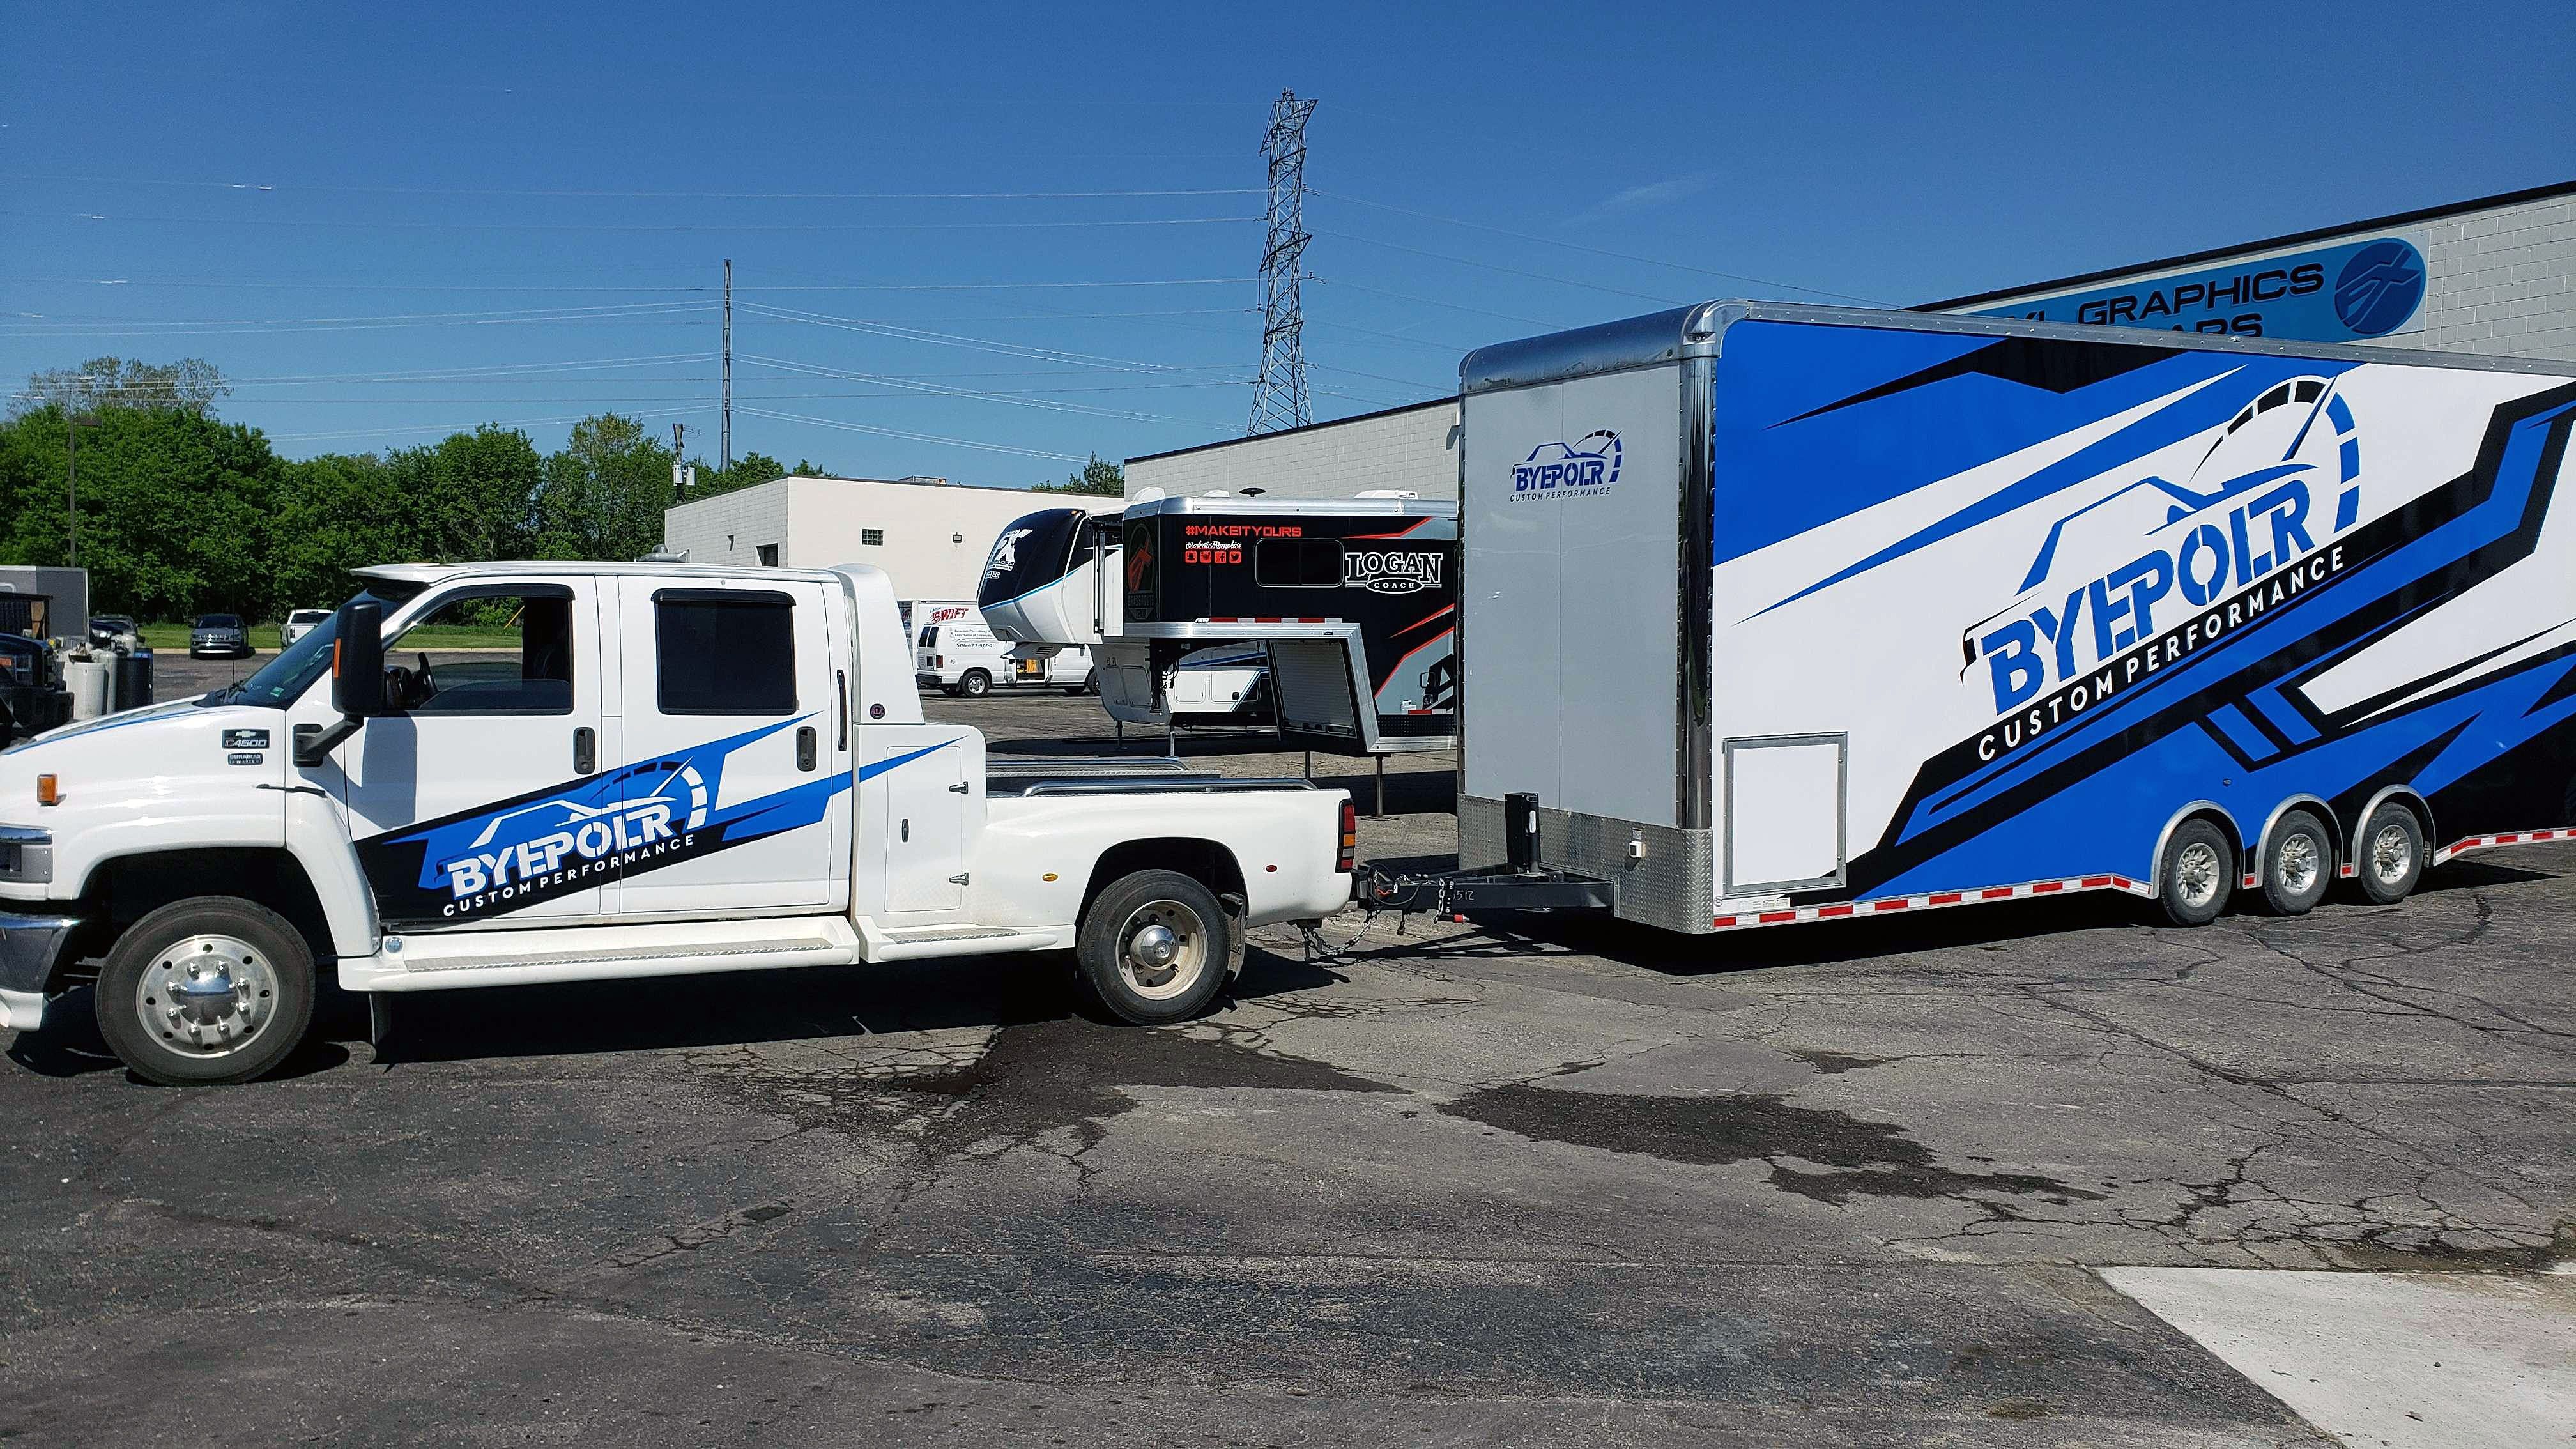 A commercial work truck and trailer with a custom vinyl wrap with white, black and blue shapes, logos, and stripes.